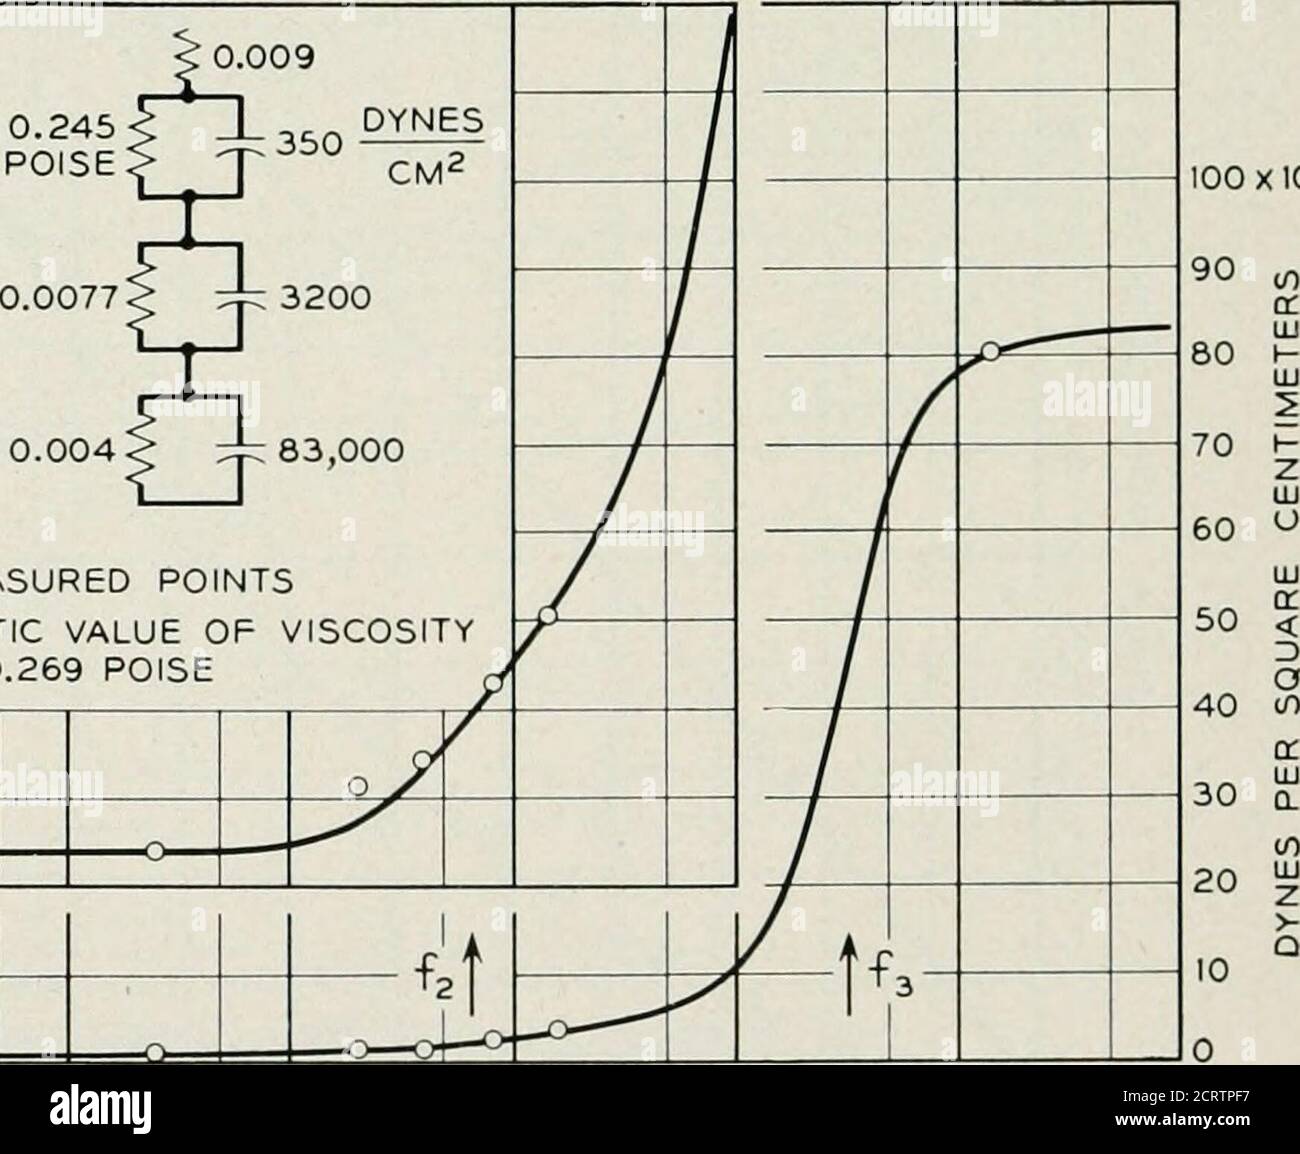 The Bell System technical journal . O MEASURED POINTSSTATIC VALUE OF= 0.269  POISE ff, 10^ = 10* = 10= ^ 10^ FREQUENCY IN CYCLES PER SECOND 100 X10^.  Fig. 13—Shear elasticity